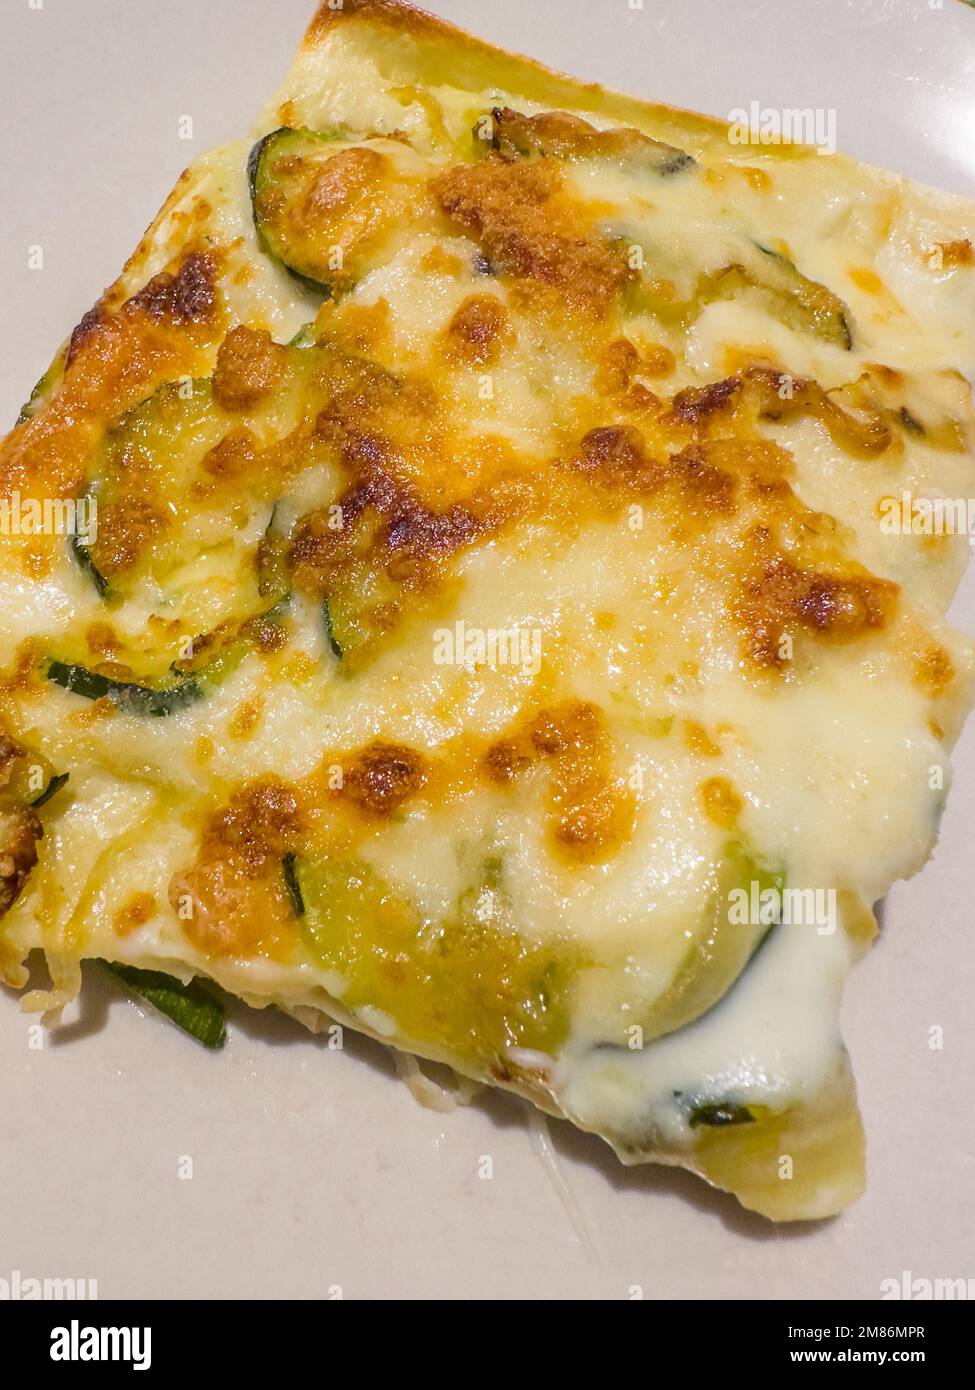 a yummy plate of home made vegeterian Lasagne Stock Photo